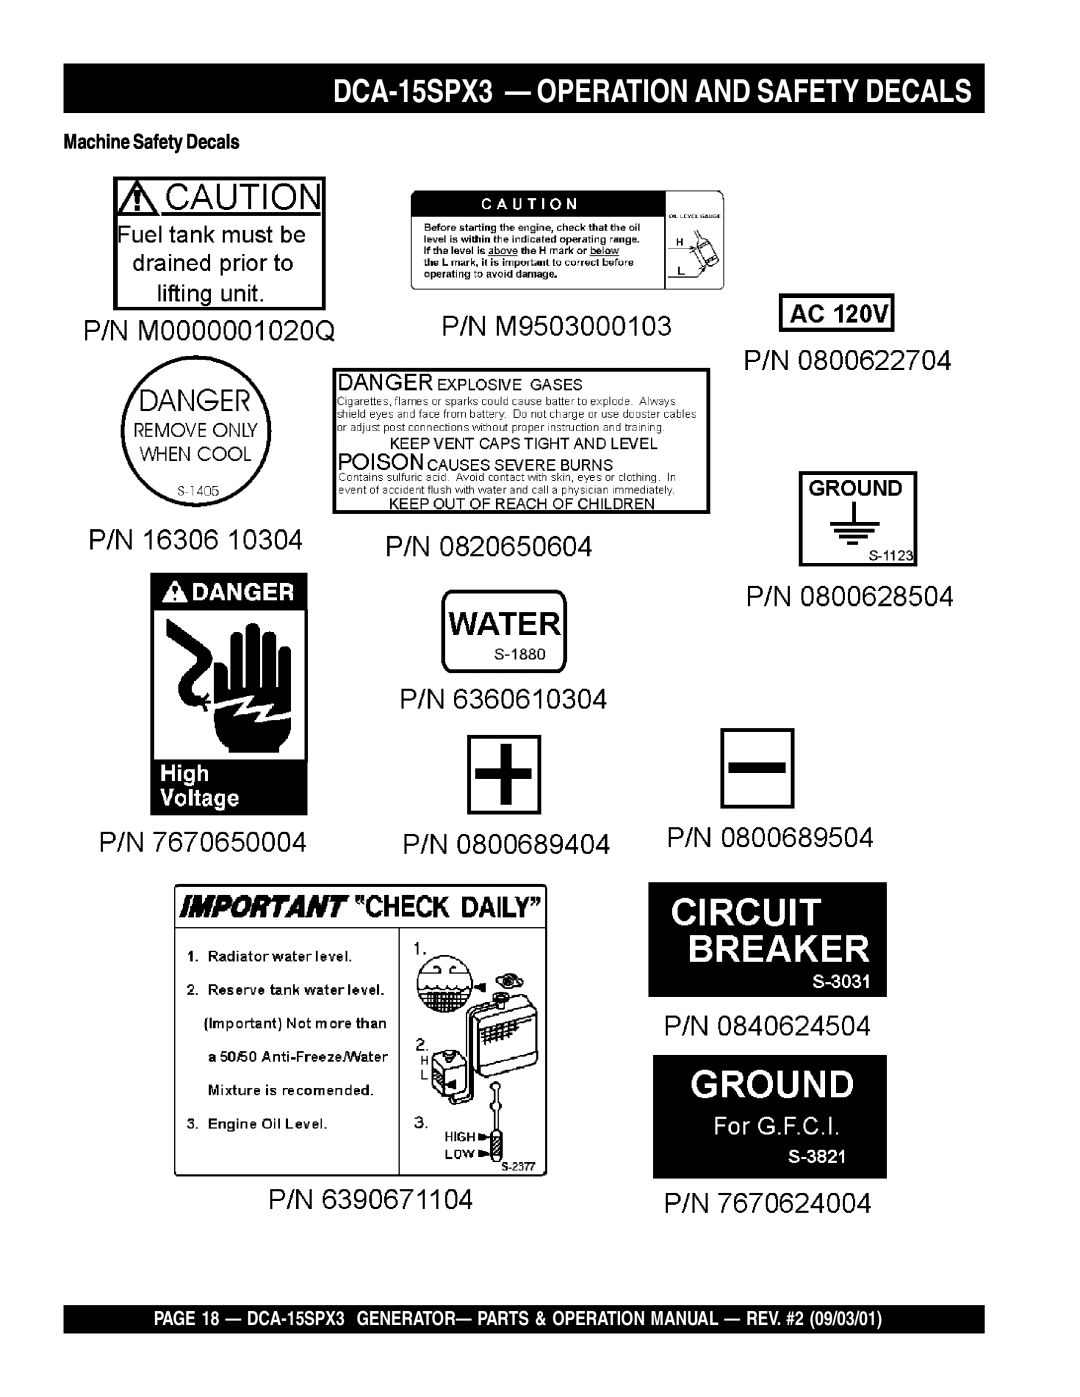 Multiquip operation manual DCA-15SPX3— OPERATION AND SAFETY DECALS, Machine Safety Decals 